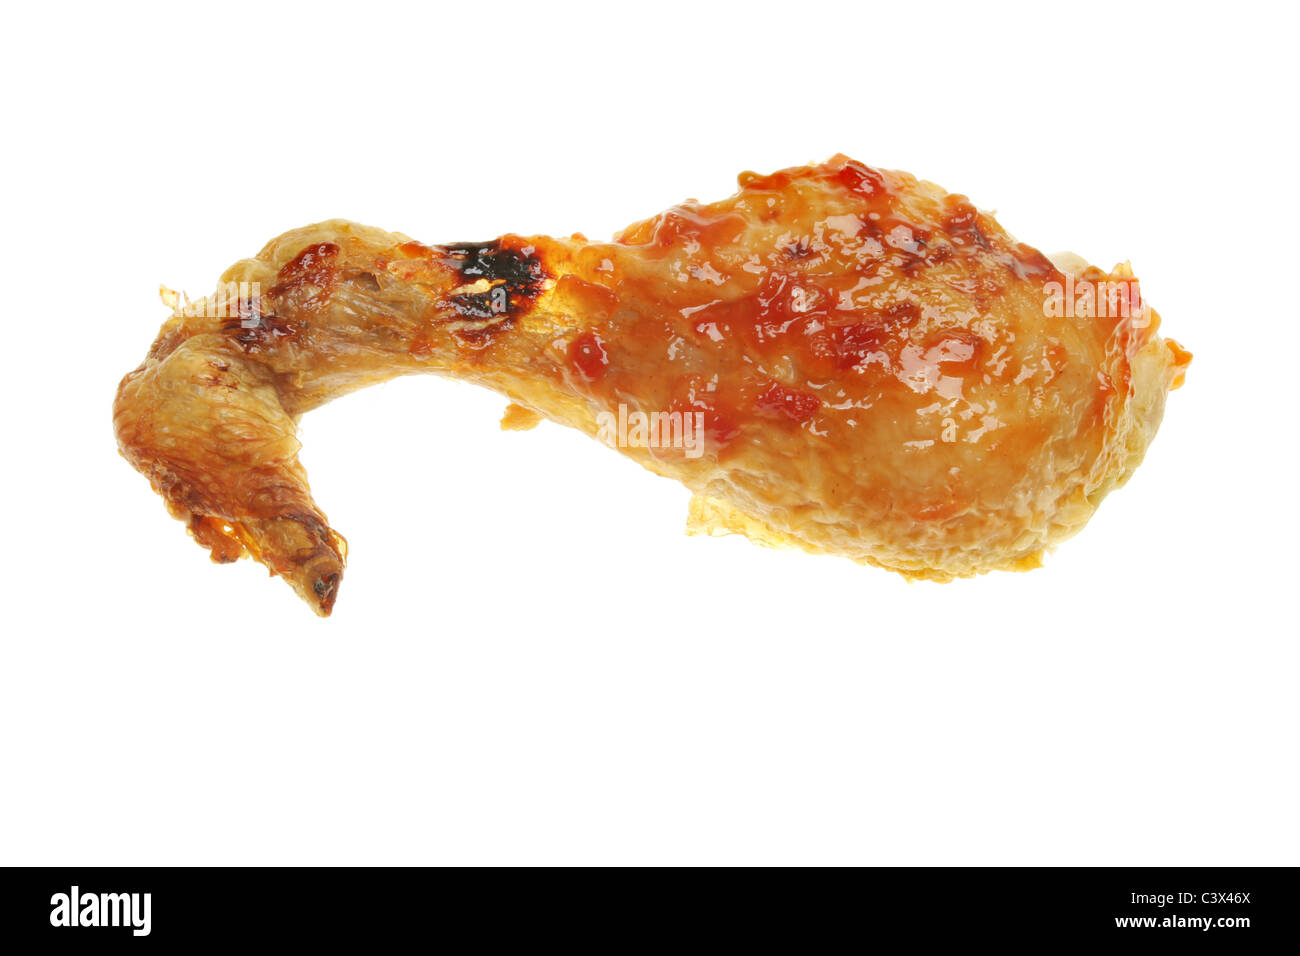 Barbecued chicken drumstick isolated against white Stock Photo